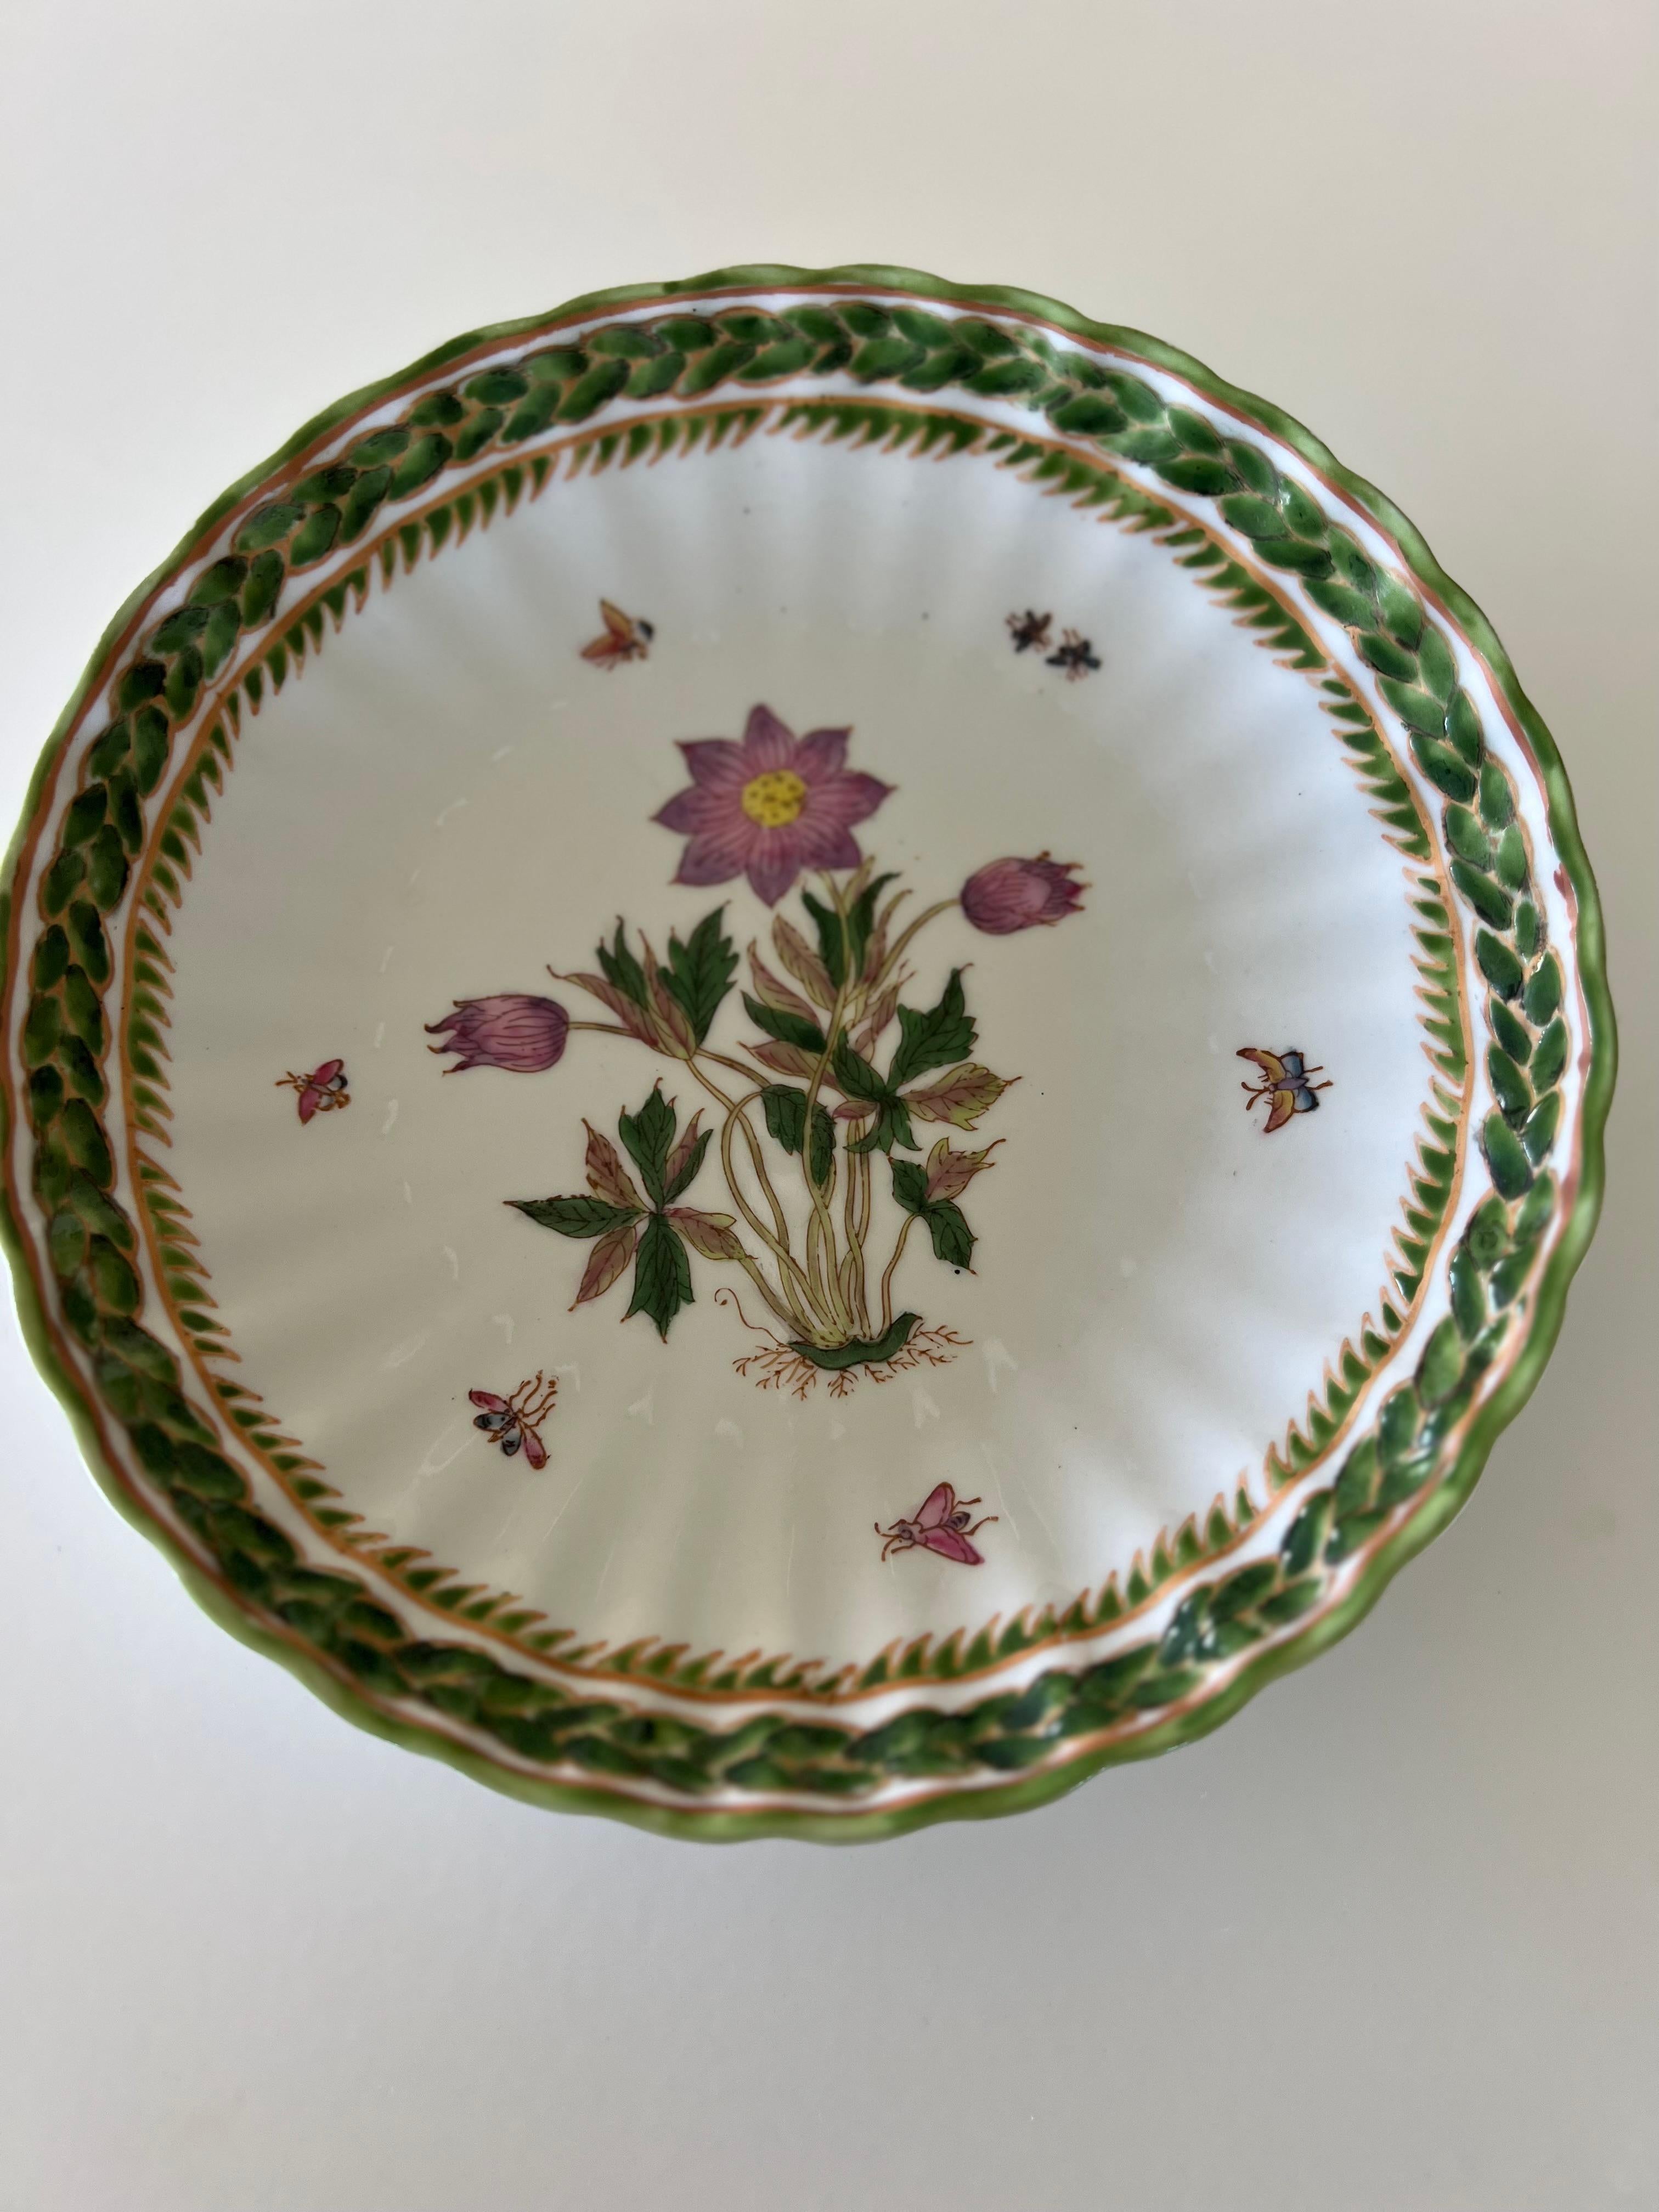 Hand-Painted Ceramic Decorative Flower and Vegetation Chinese Plate Signed WL, 1896 For Sale